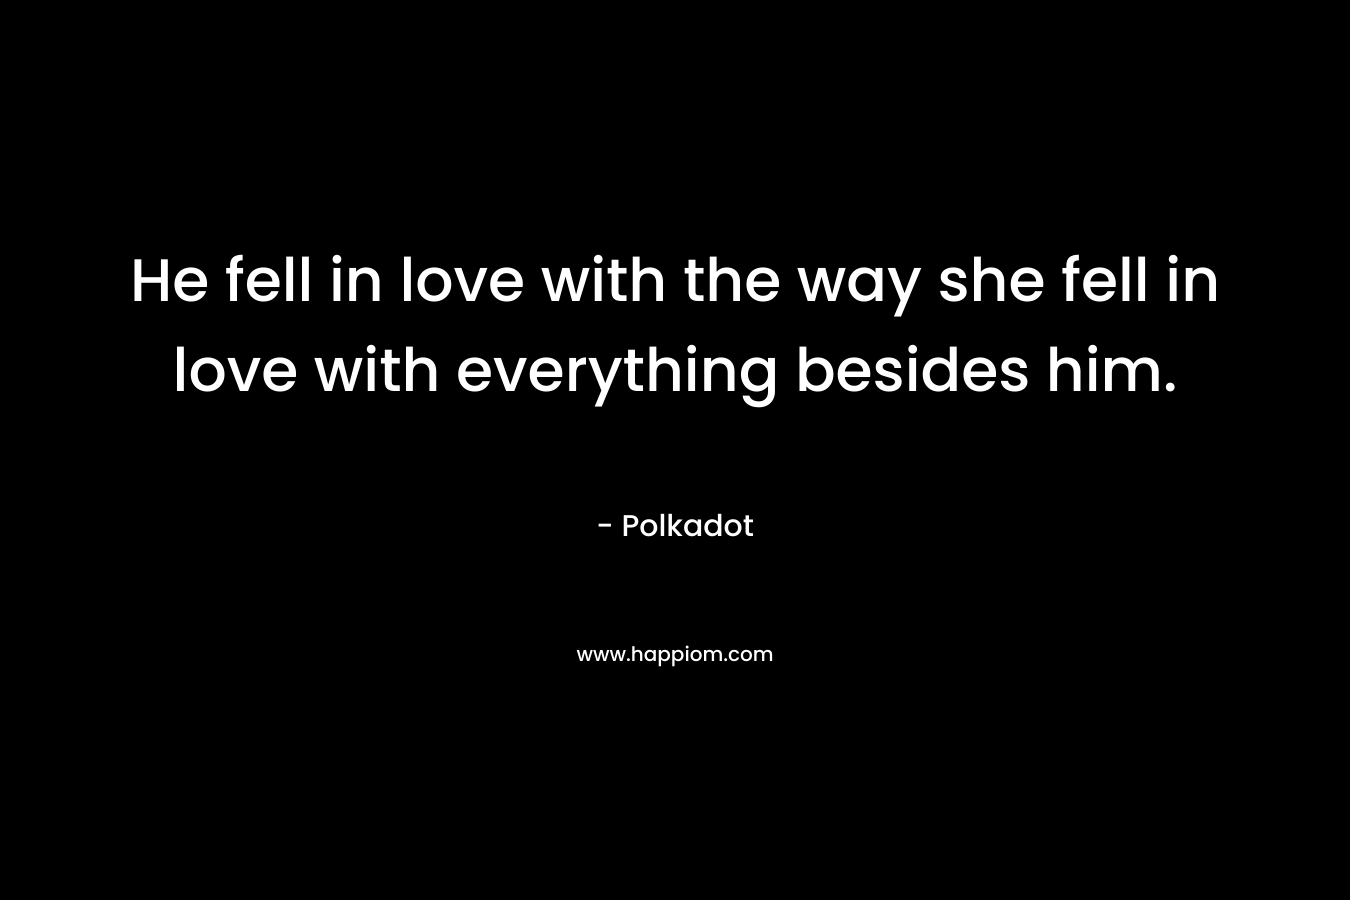 He fell in love with the way she fell in love with everything besides him.